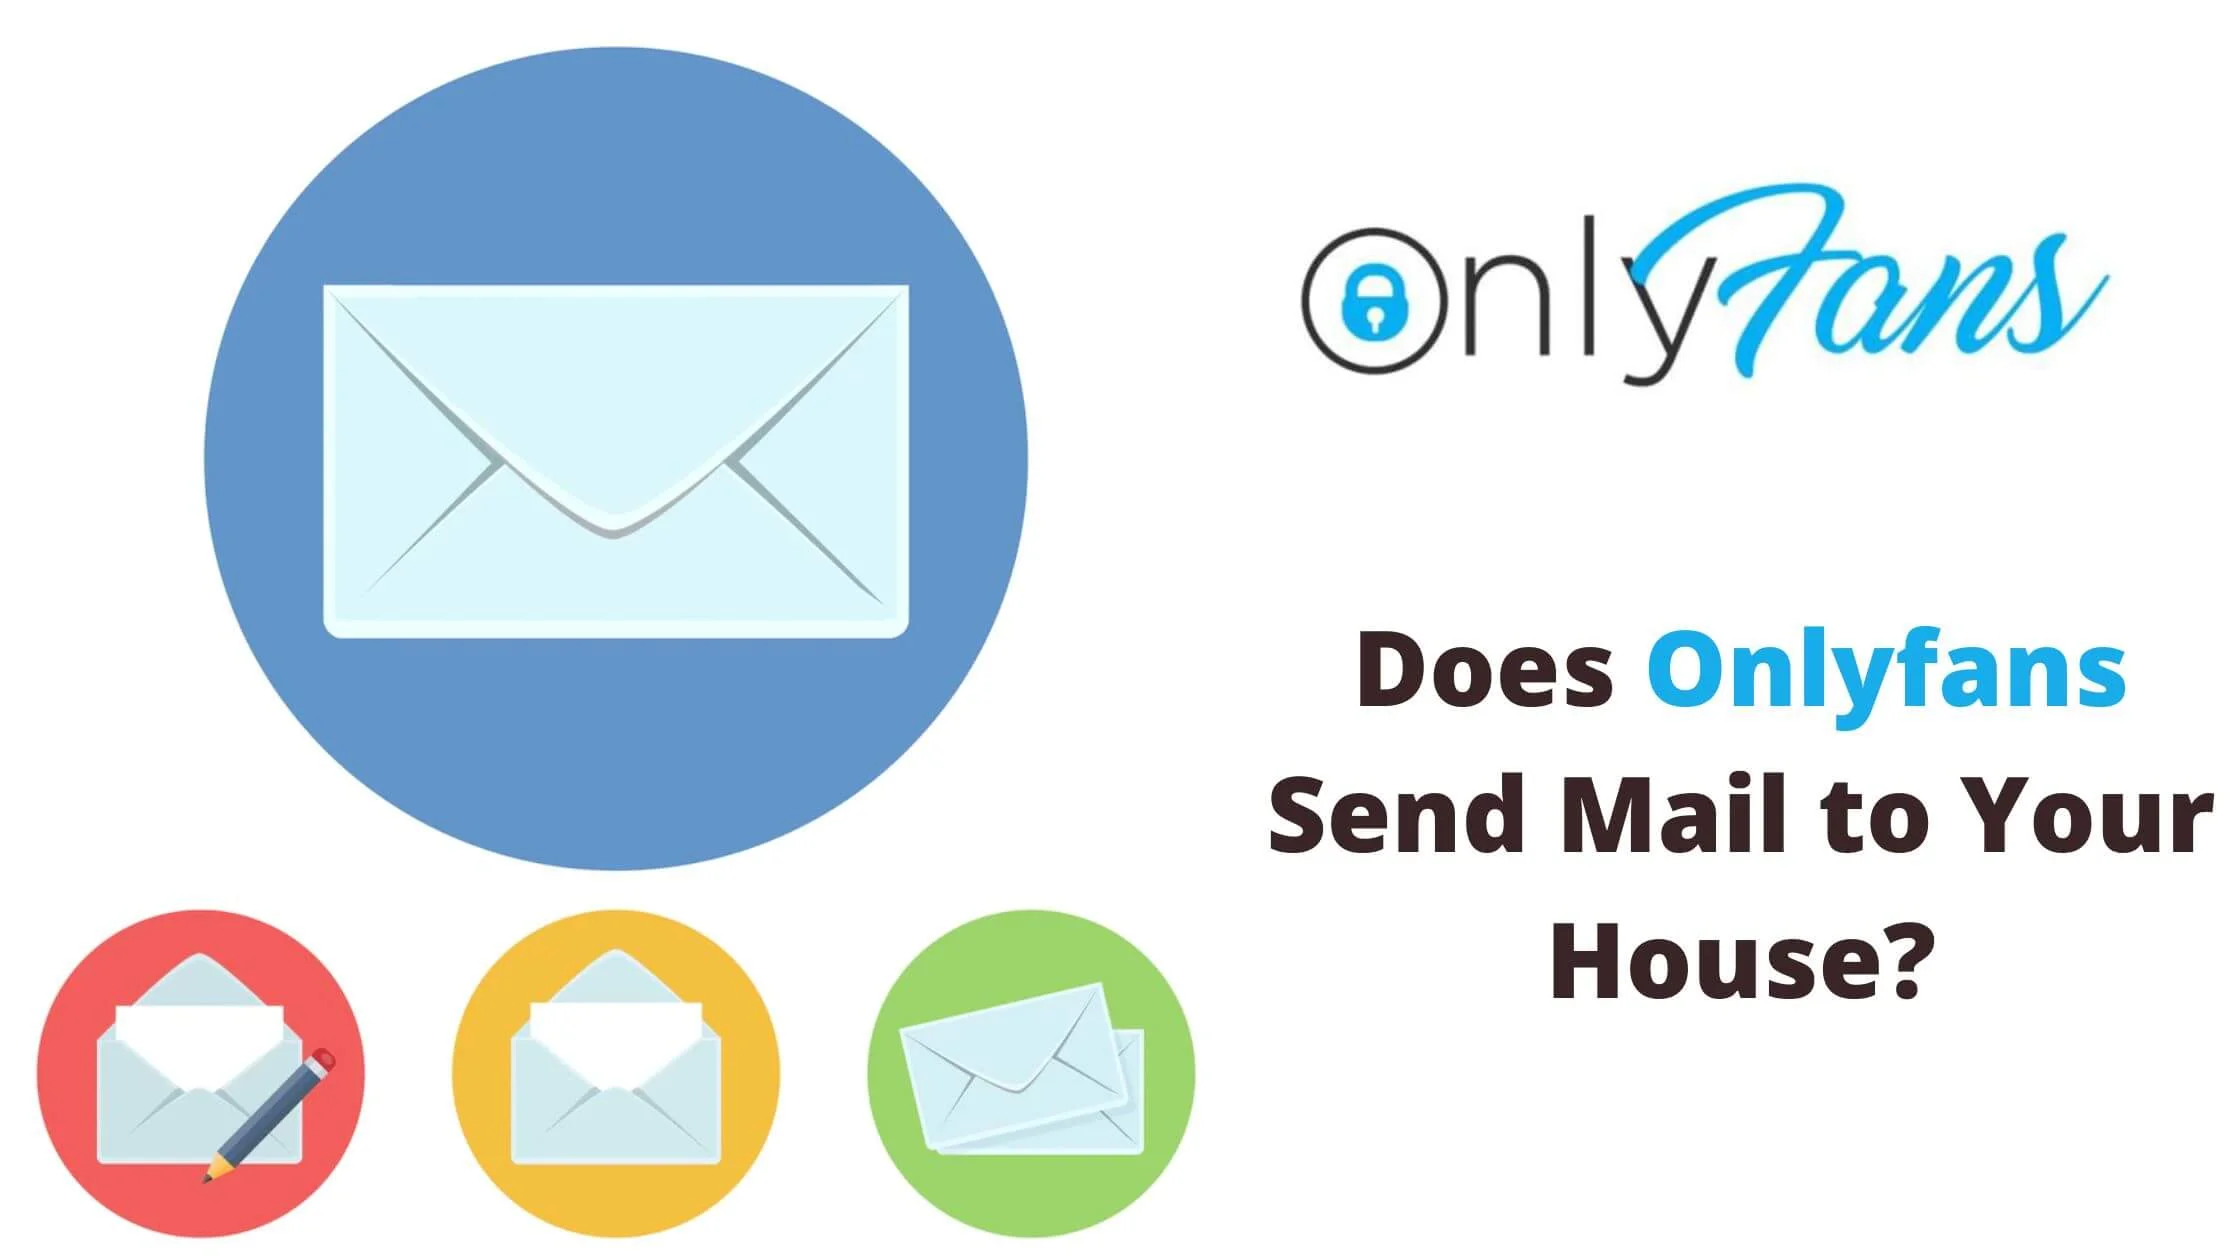 Onlyfans Send Mail to Your House